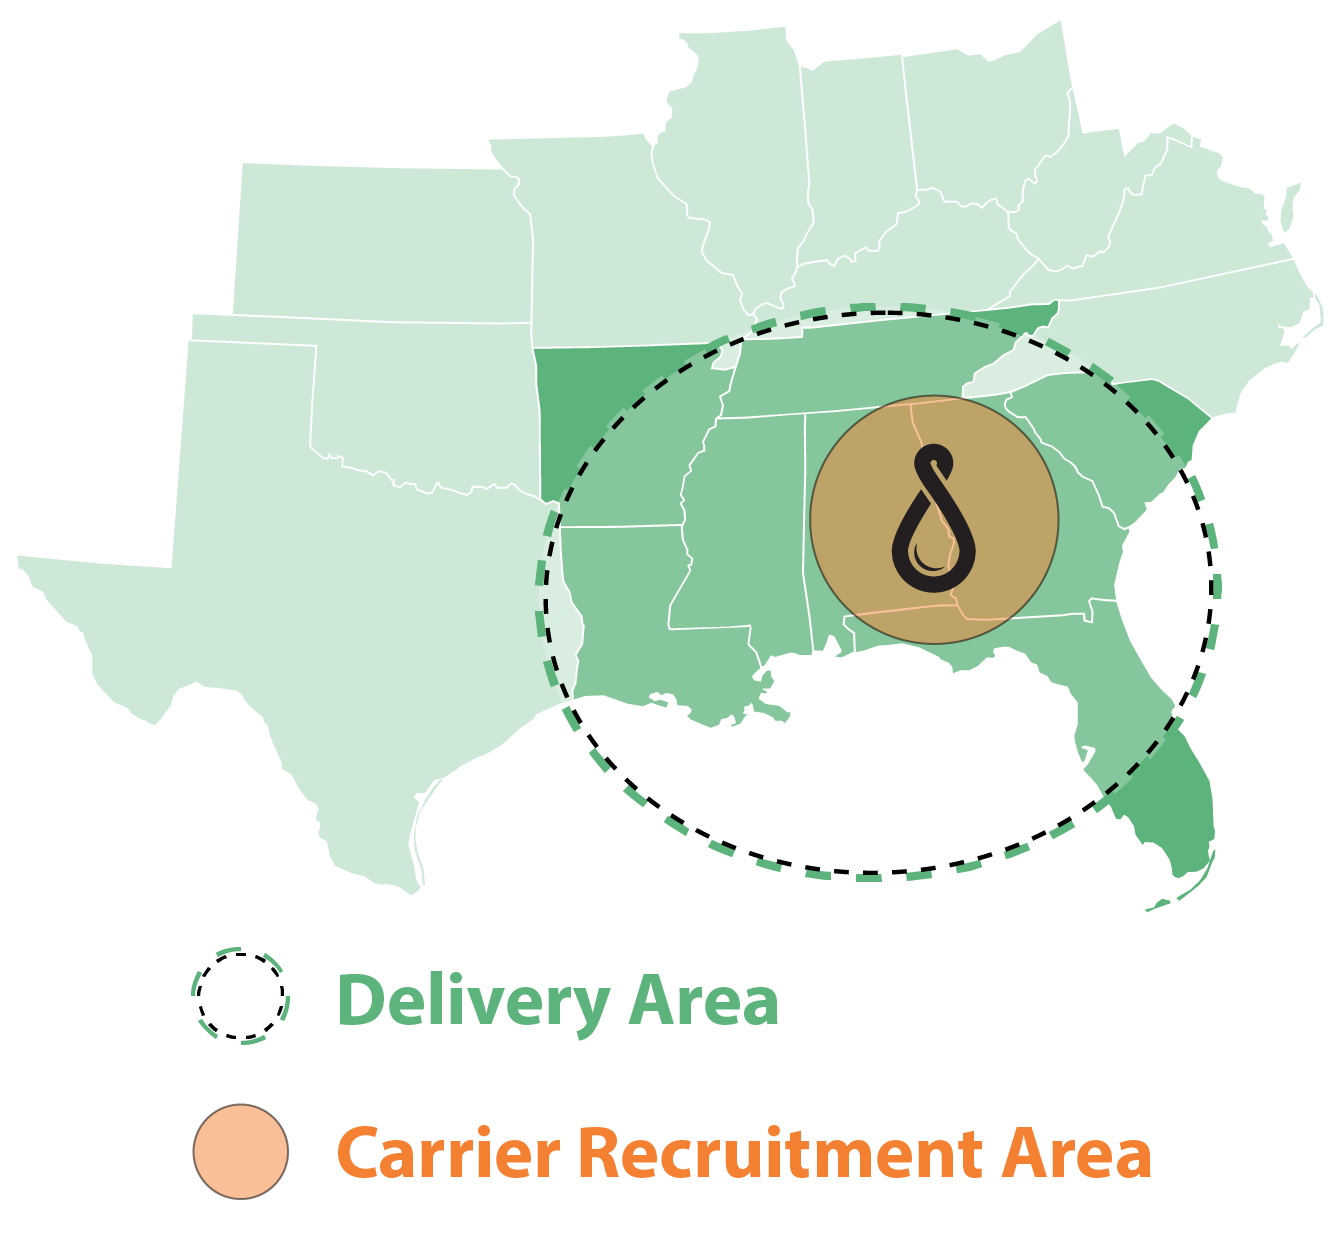 Recruitment and delivery map for Spring Logistics